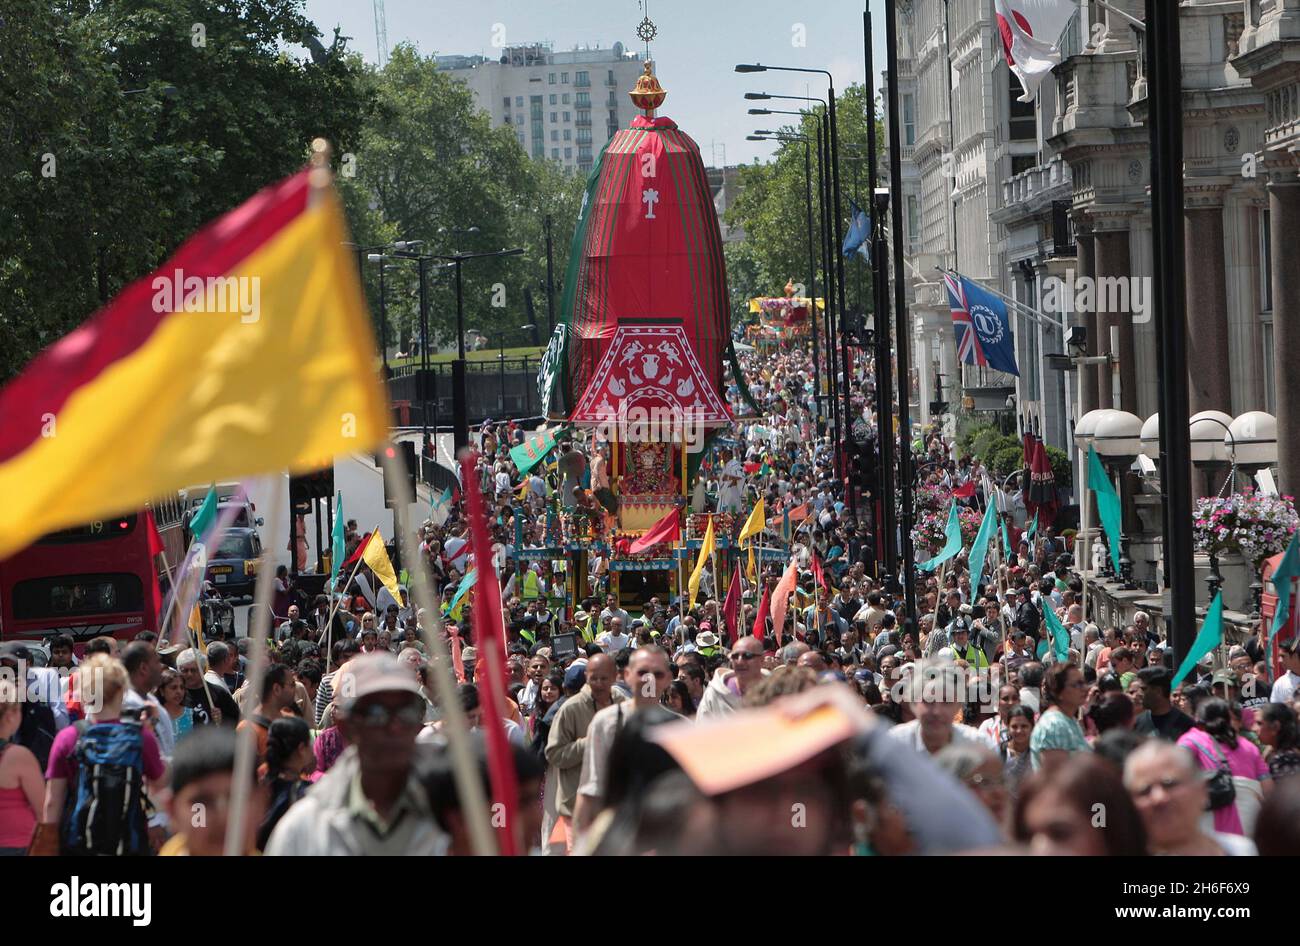 Scenes from the 40th London Festival of Chariots. The festival, otherwise known as Ratha Yatra, celebrating Hare Krishna, which took place in central London. The 5000-year-old festival was brought from India in 1967 by the founder of the Hare Krishna movement and is celebrated every summer in over 200 cities around the world - this year in London for the 40th time. Stock Photo